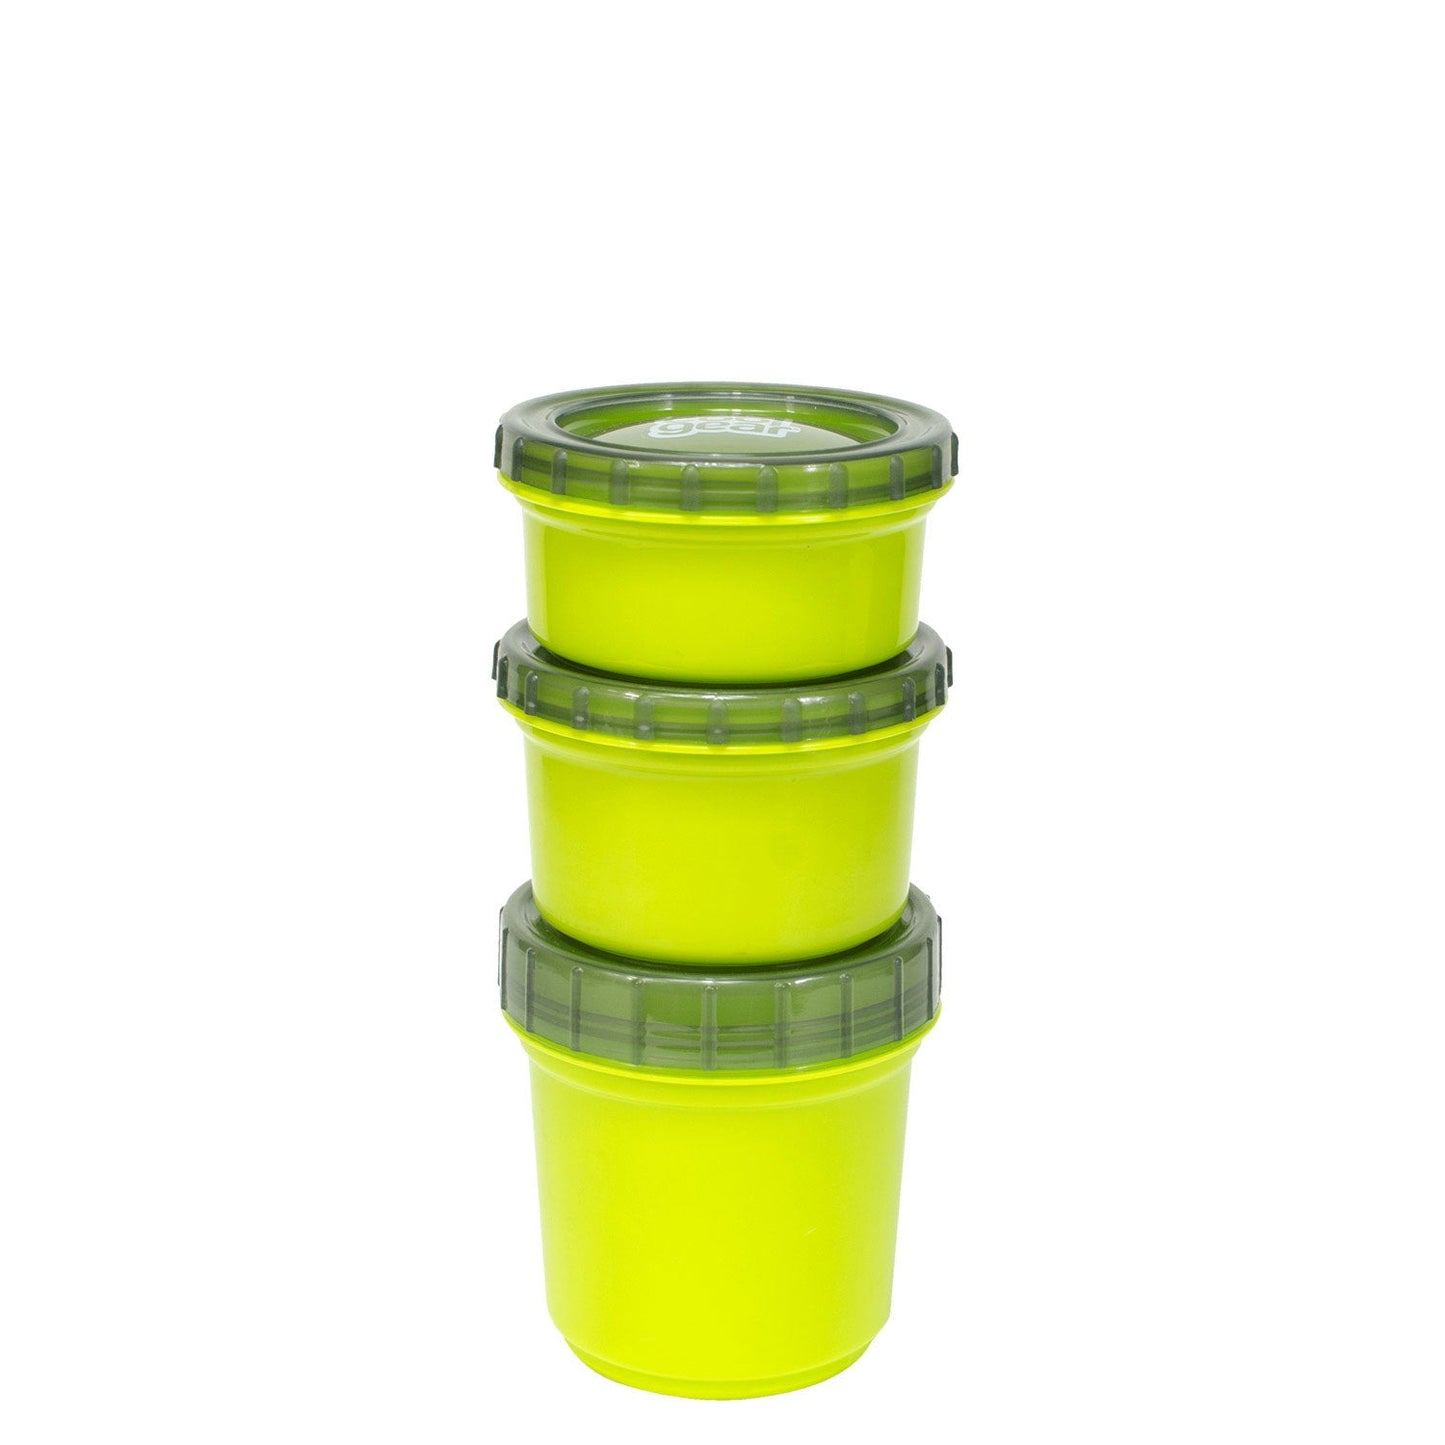 Cool Gear 2-Pack Kids Stackable Snack Snap Containers with Freezer Gel | 3 Reusable Food Containers With Twist Off Lids | Double Insulated with Freezer Gel To Keep Food Cold - Blue/Yellow